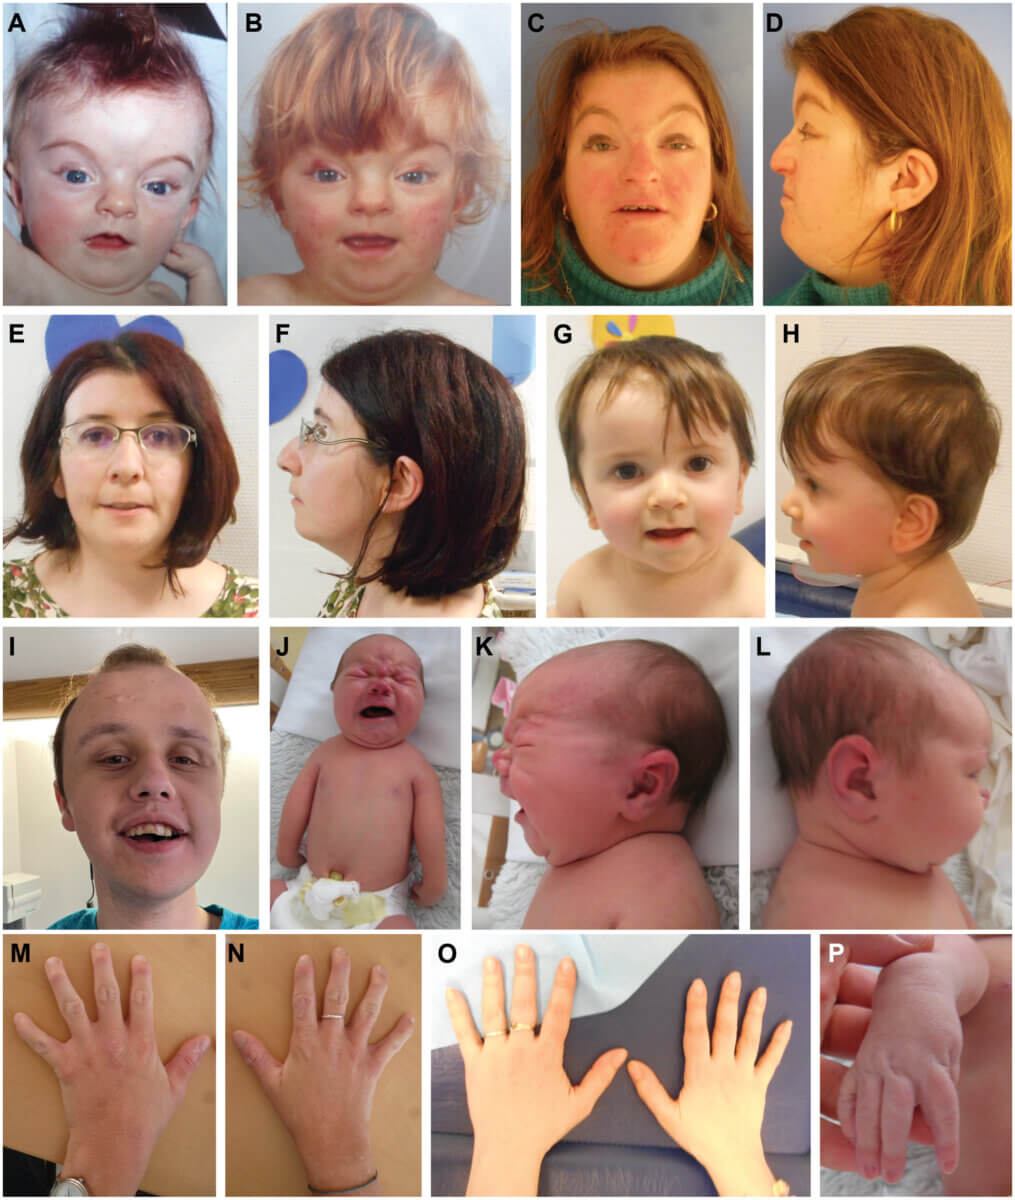 Fig. 2. Affected individuals display CFAs and limb abnormalities. (A to D) Affected individual at the age of 4 months (A), 14 months (B), and 28 years (C and D). Individual displays ptosis, high arched eyebrows, broad nasal root, thin lips, and posteriorly rotated ears. (E to H) Affected mother at 29 years of age (E and F) and her affected child (G and H) at 11 months of age. Individuals display down-slanting palpebral fissures, low-set ears, and thin upper lip. (I) Affected individual at 18 years of age. Individual displays high anterior hairline, ptosis, and down-slanting palpebral fissures. (J to L) Affected infant displays asymmetric crying facies, wide and flat nasal bridge, posteriorly rotated ears, as well as shoulder, hand, and elbow malformations. (M to P) Affected individuals display limb abnormalities including brachydactyly (M to O) and wrist contractures (P).